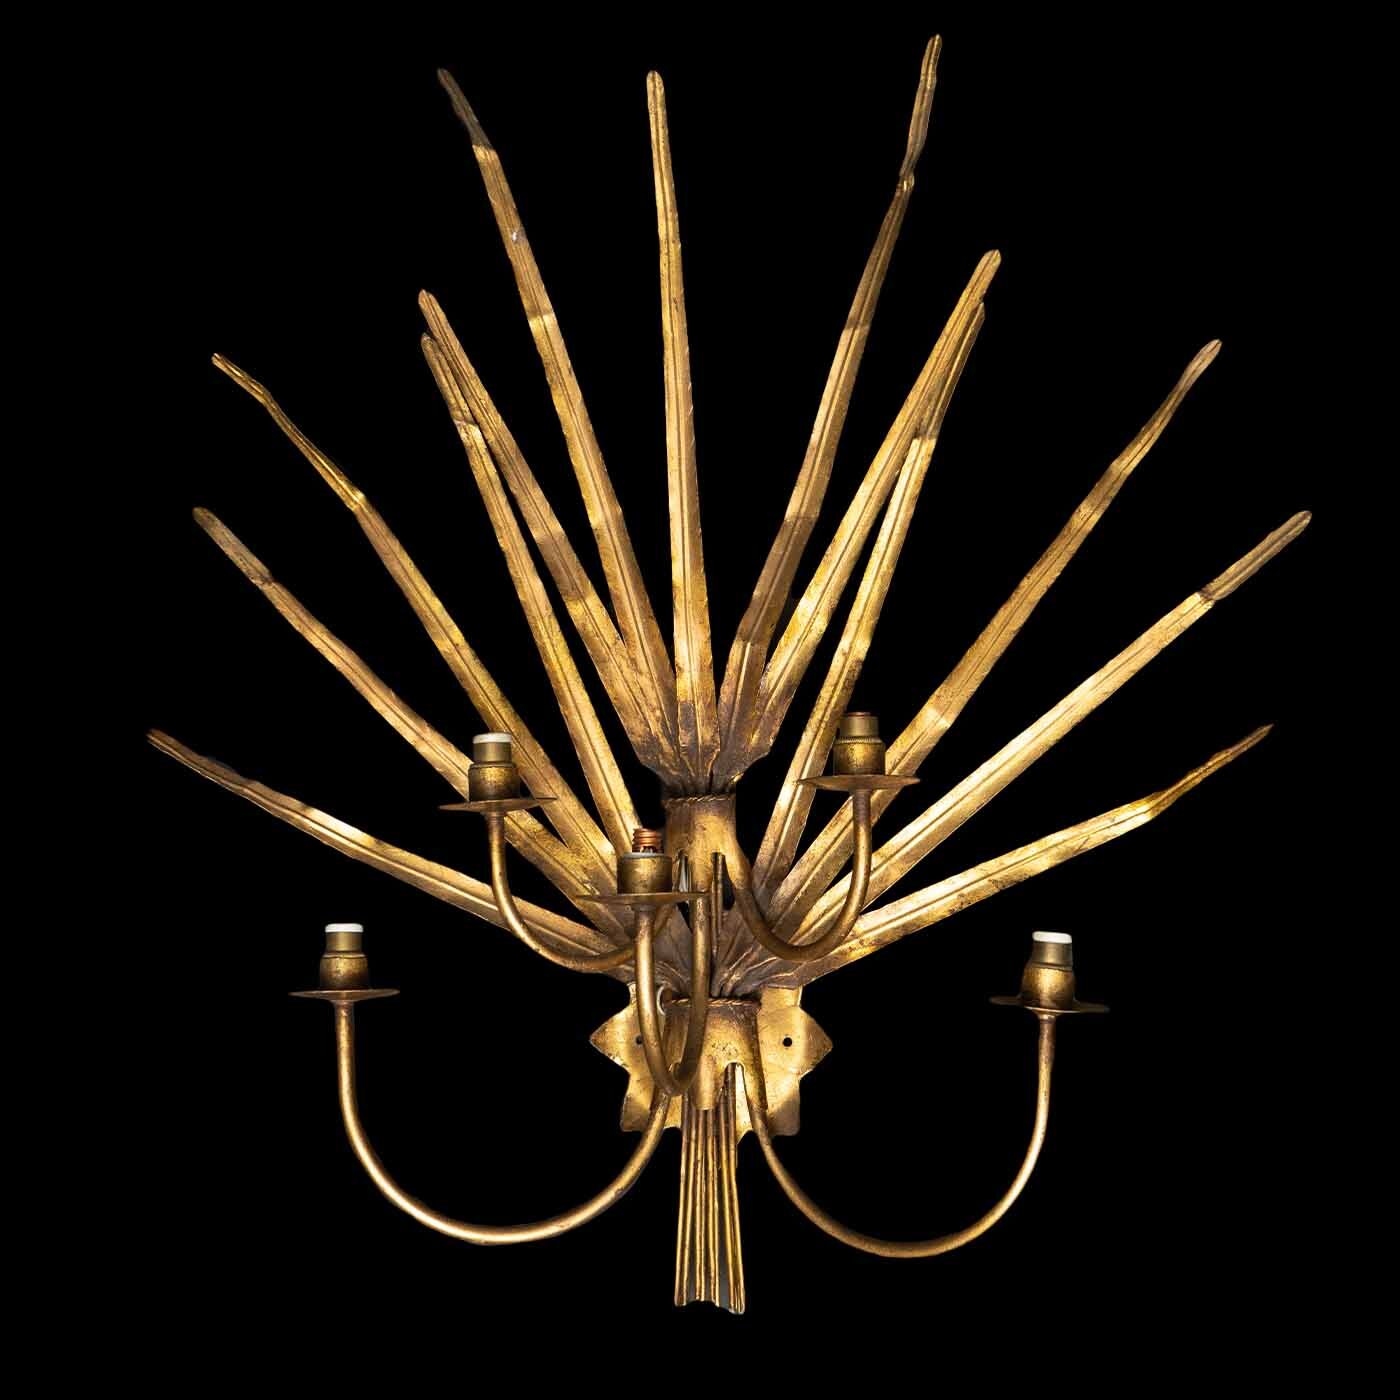 Pair of Gilt Wheat Wall Sconce